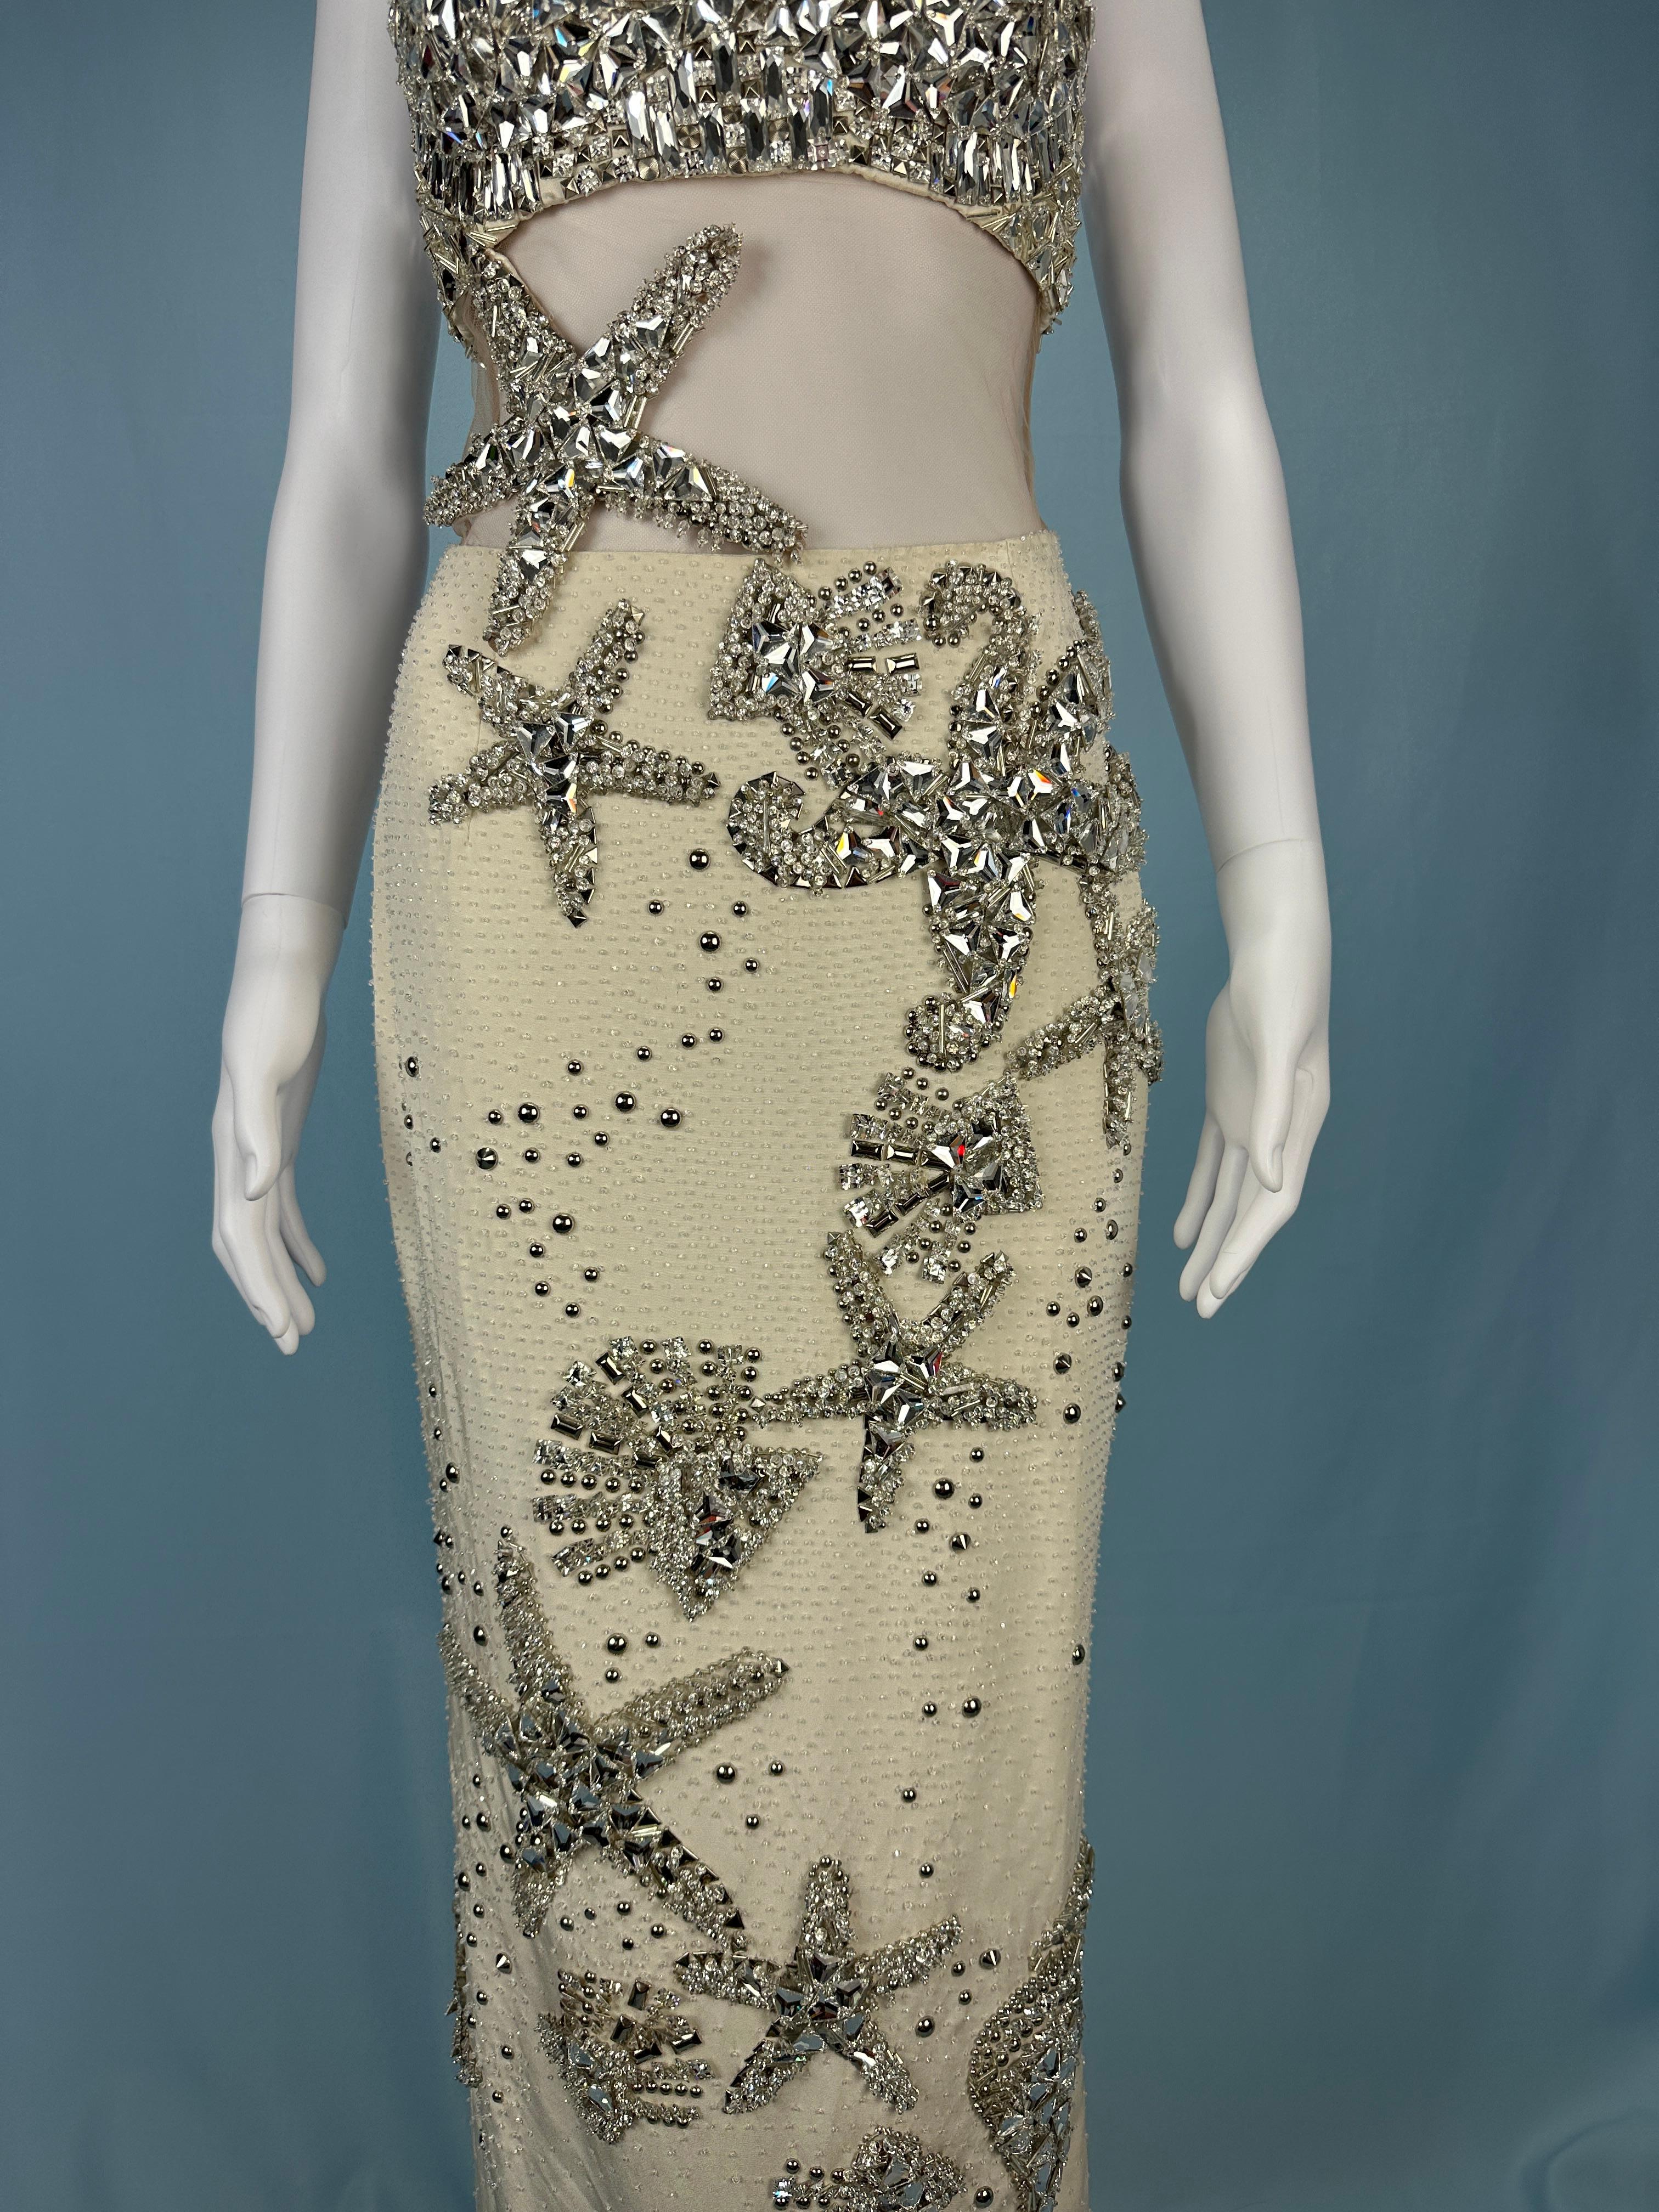 Atelier Versace Spring 2012 Runway Crystal Embellished Starfish Shell Dress 3